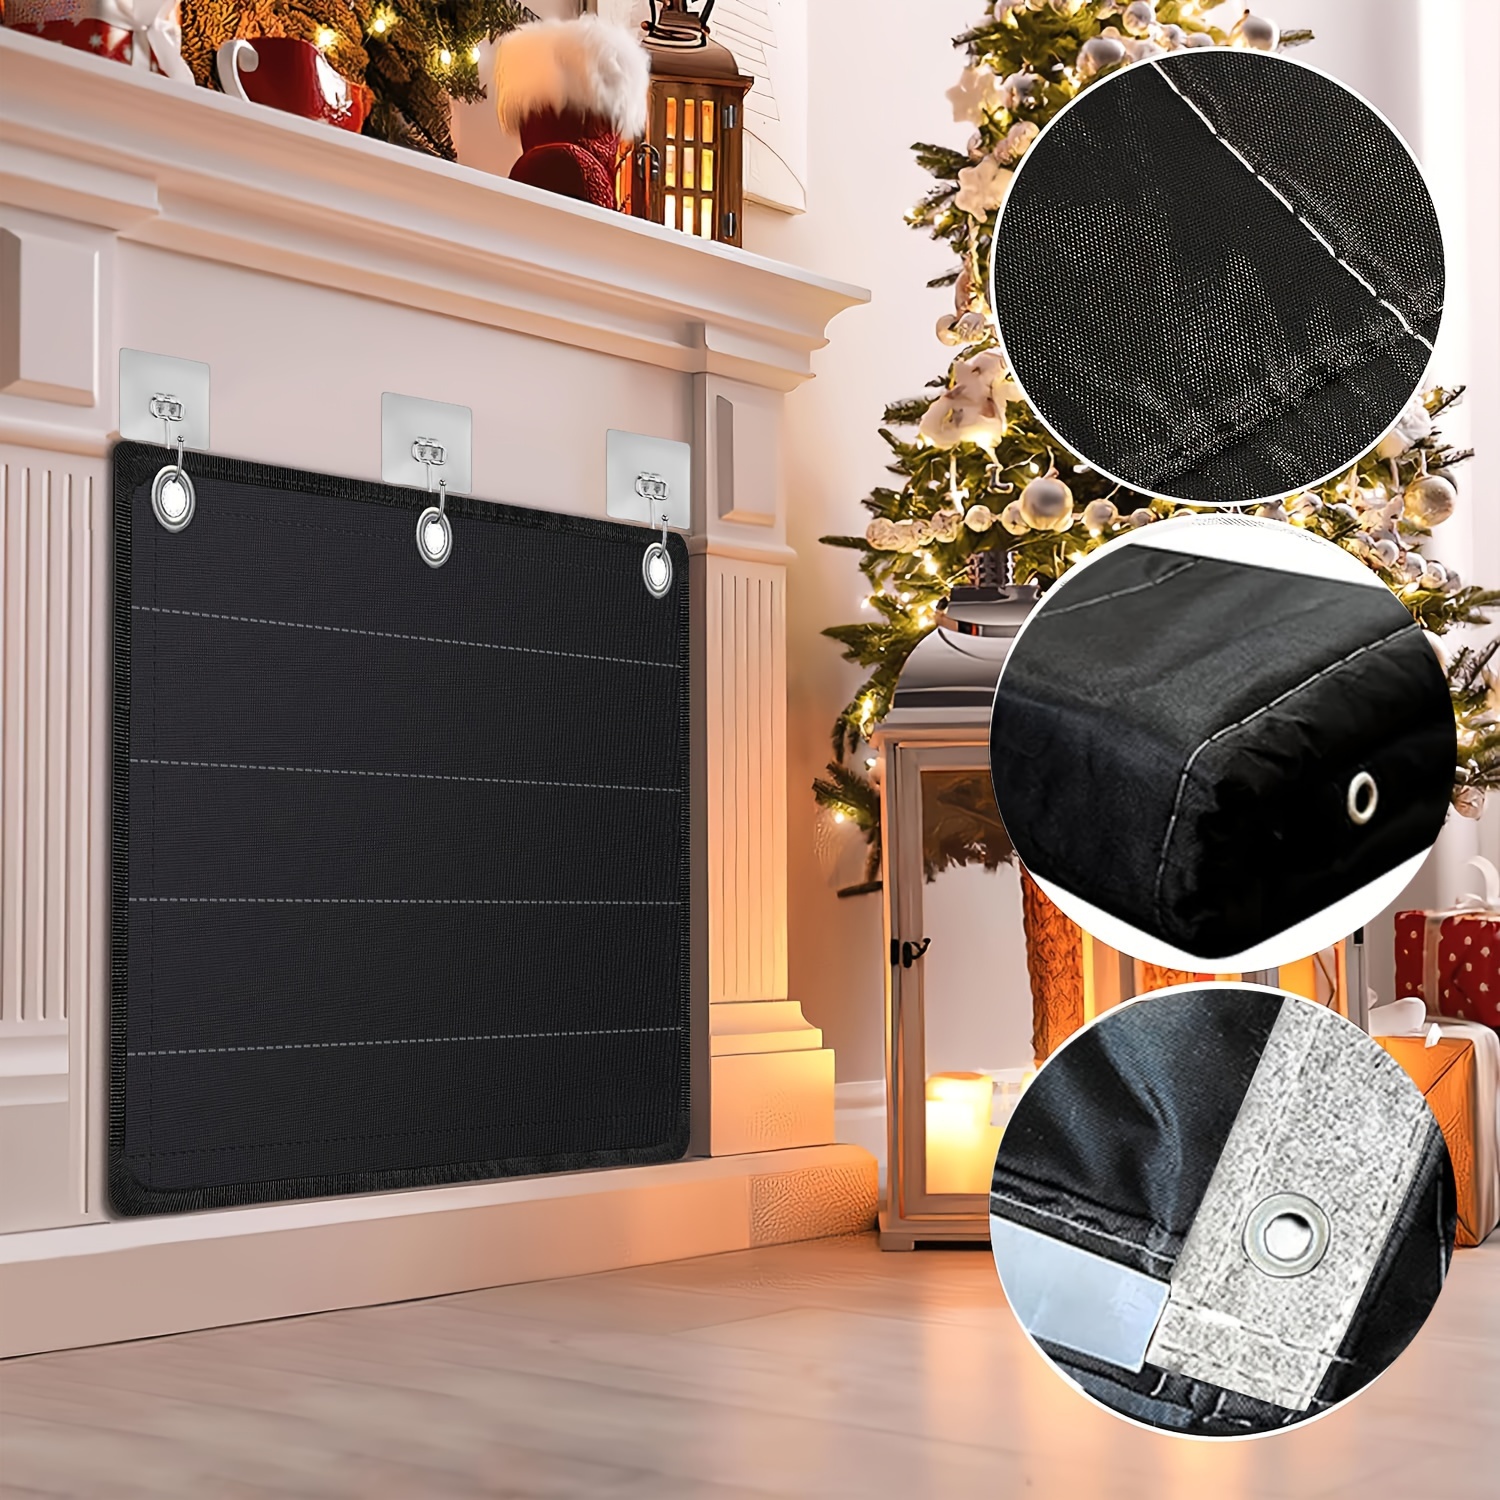 AOKE Fireplace Cover-Magnetic Fireplace Blanket for Heat Loss